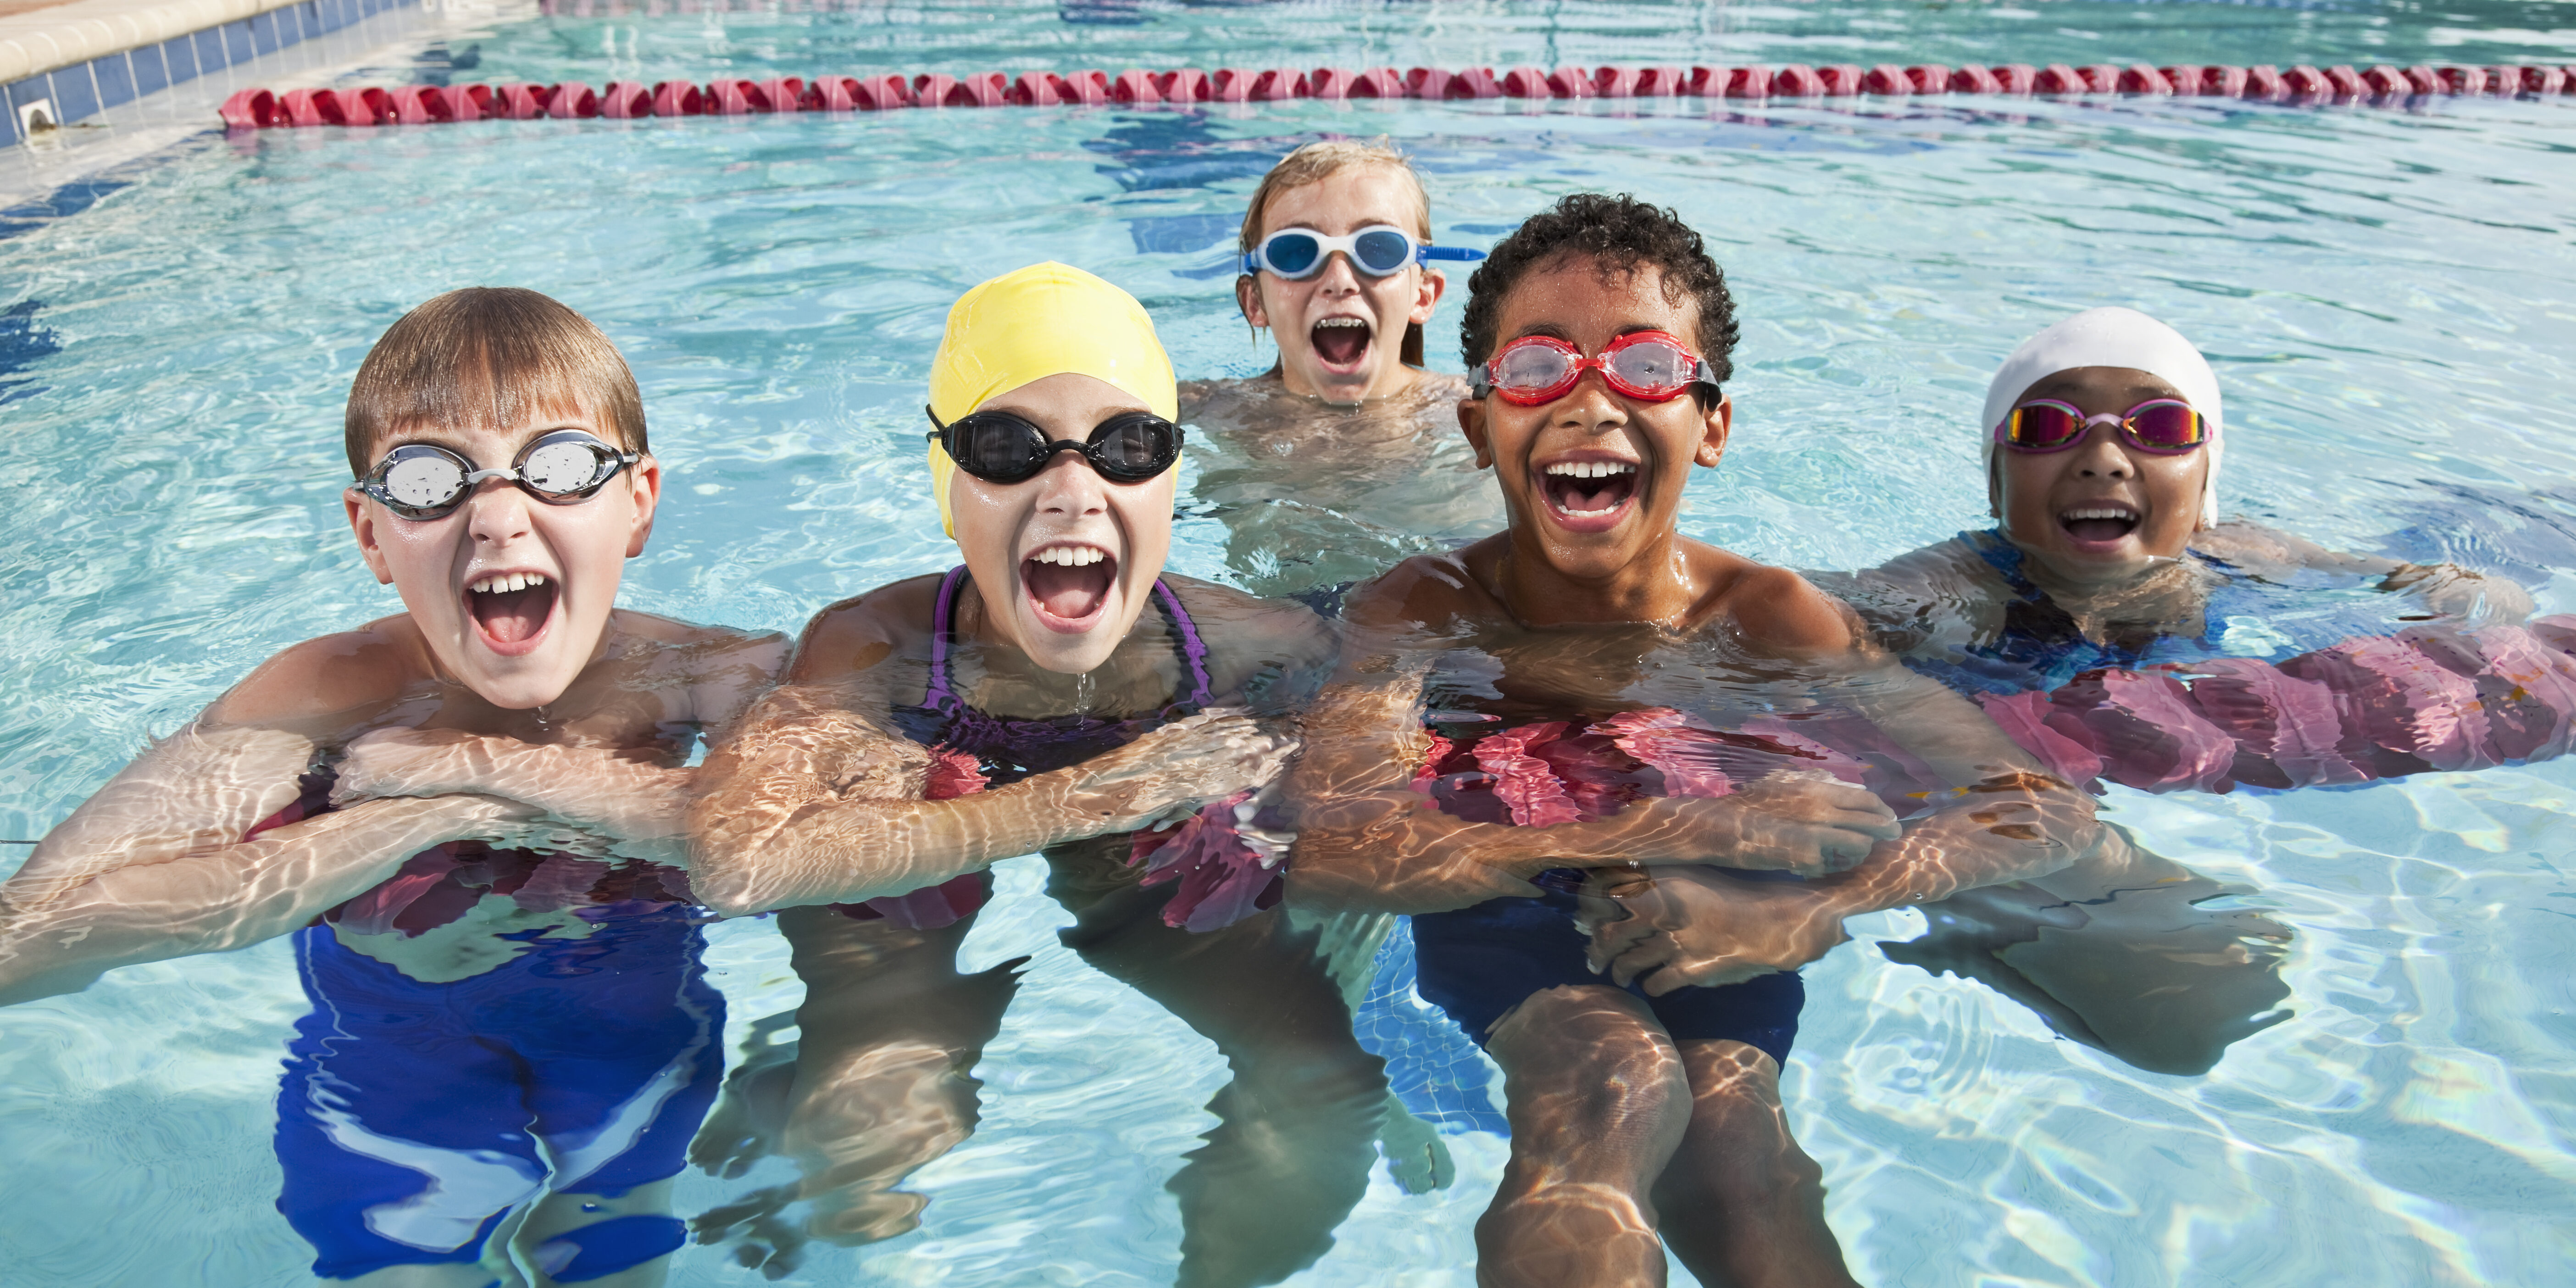 A multiracial group of five children having fun in a swimming pool, hanging onto a lane rope, looking at the camera, laughing and shouting.  The three boys and two girls are 9 to 12 years old.  They are wearing swimsuits and goggles, and the girls have on swim caps.